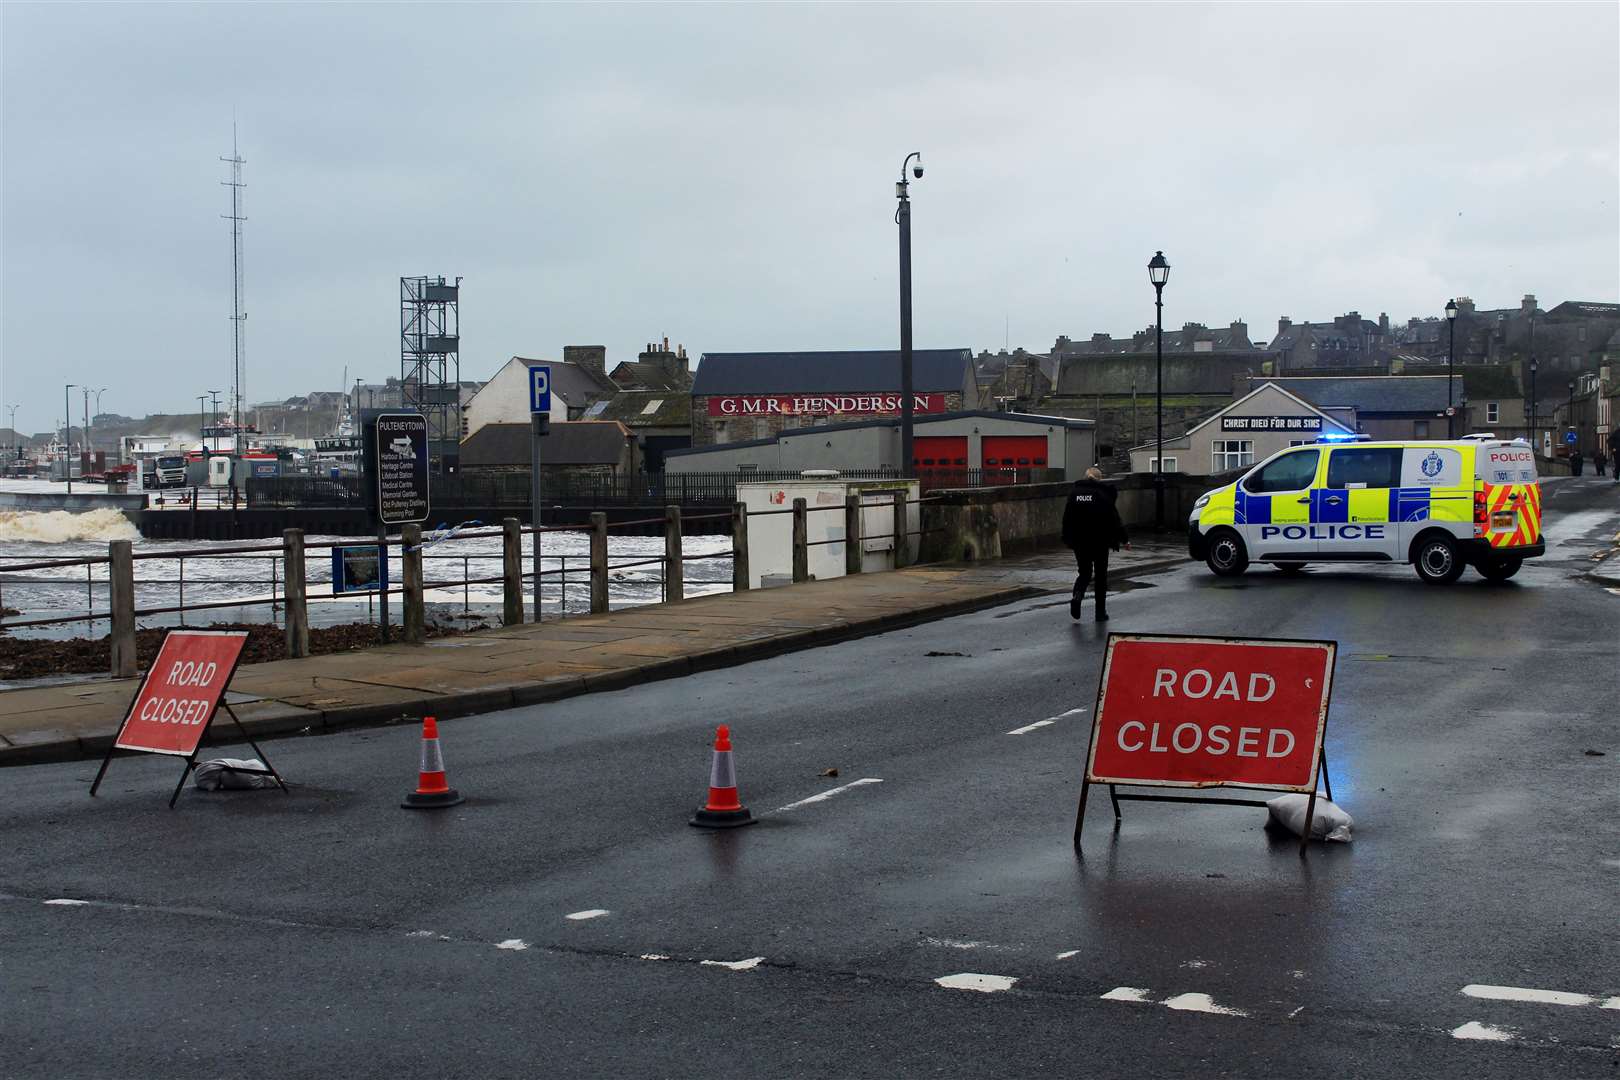 A police van blocking access to the Service Bridge. Picture: Alan Hendry